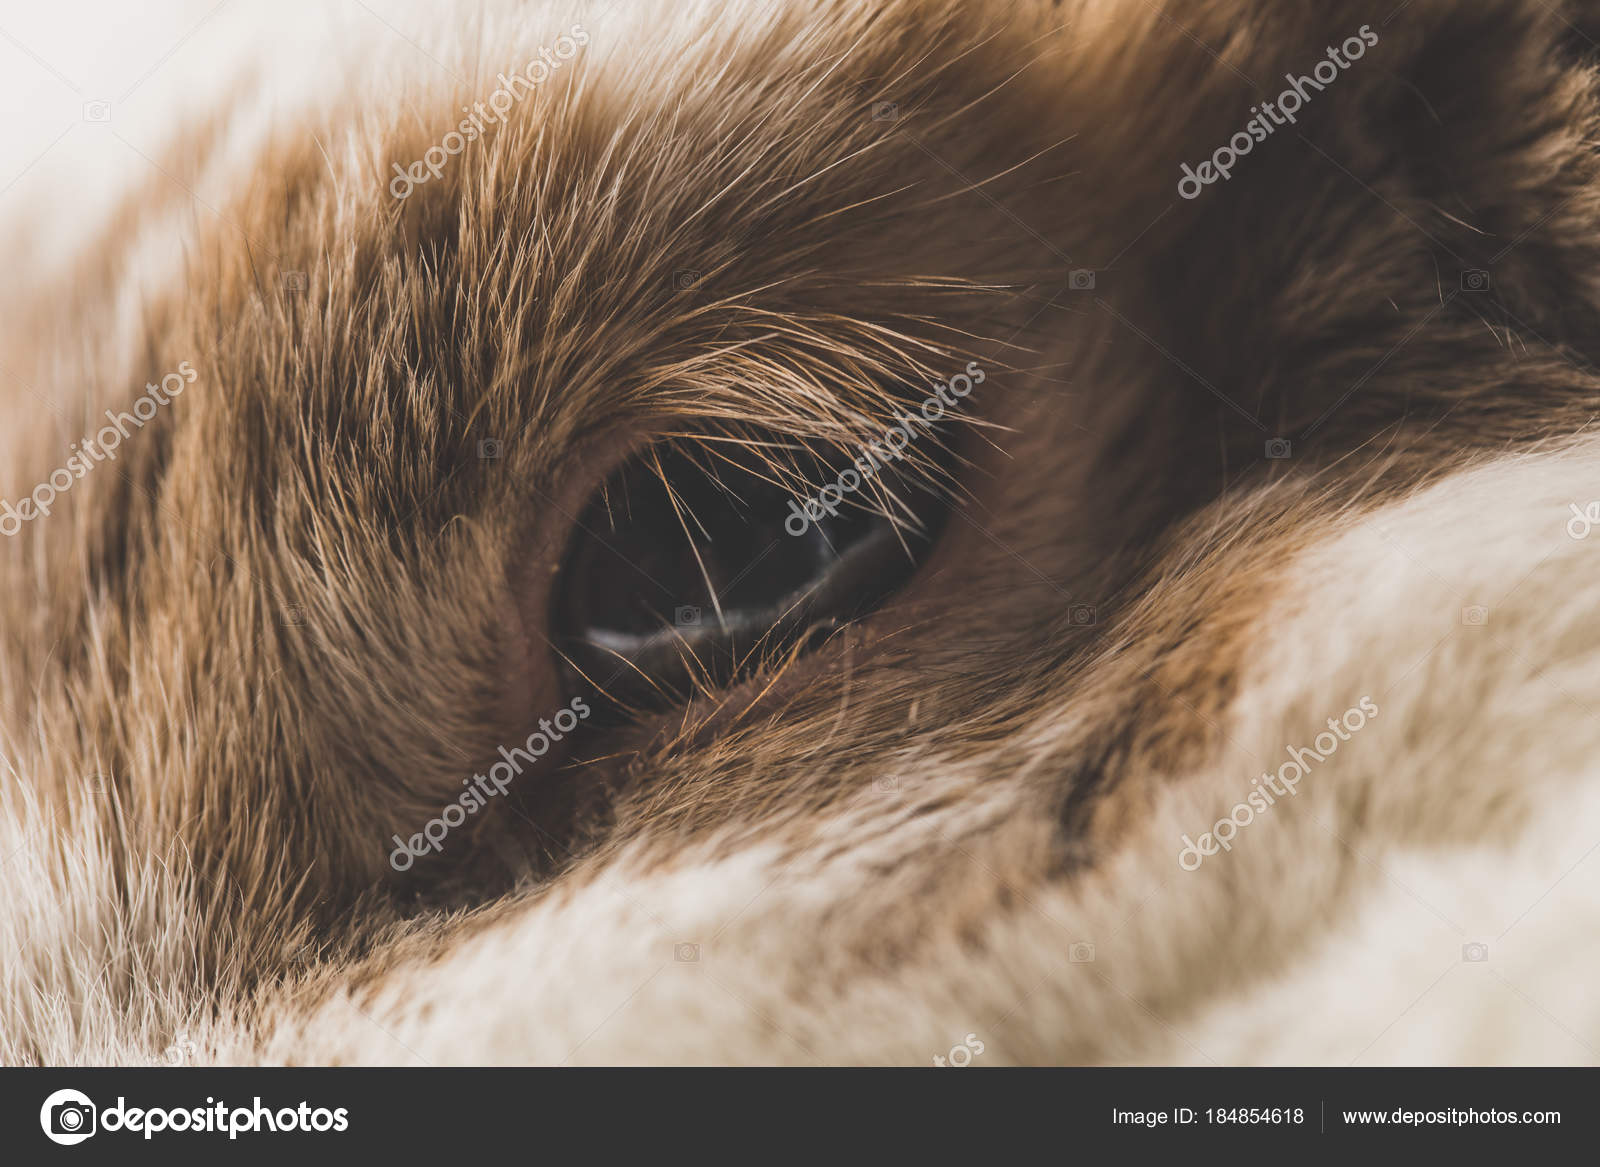 Bunny Eyes Stock Photos, Images and Backgrounds for Free Download